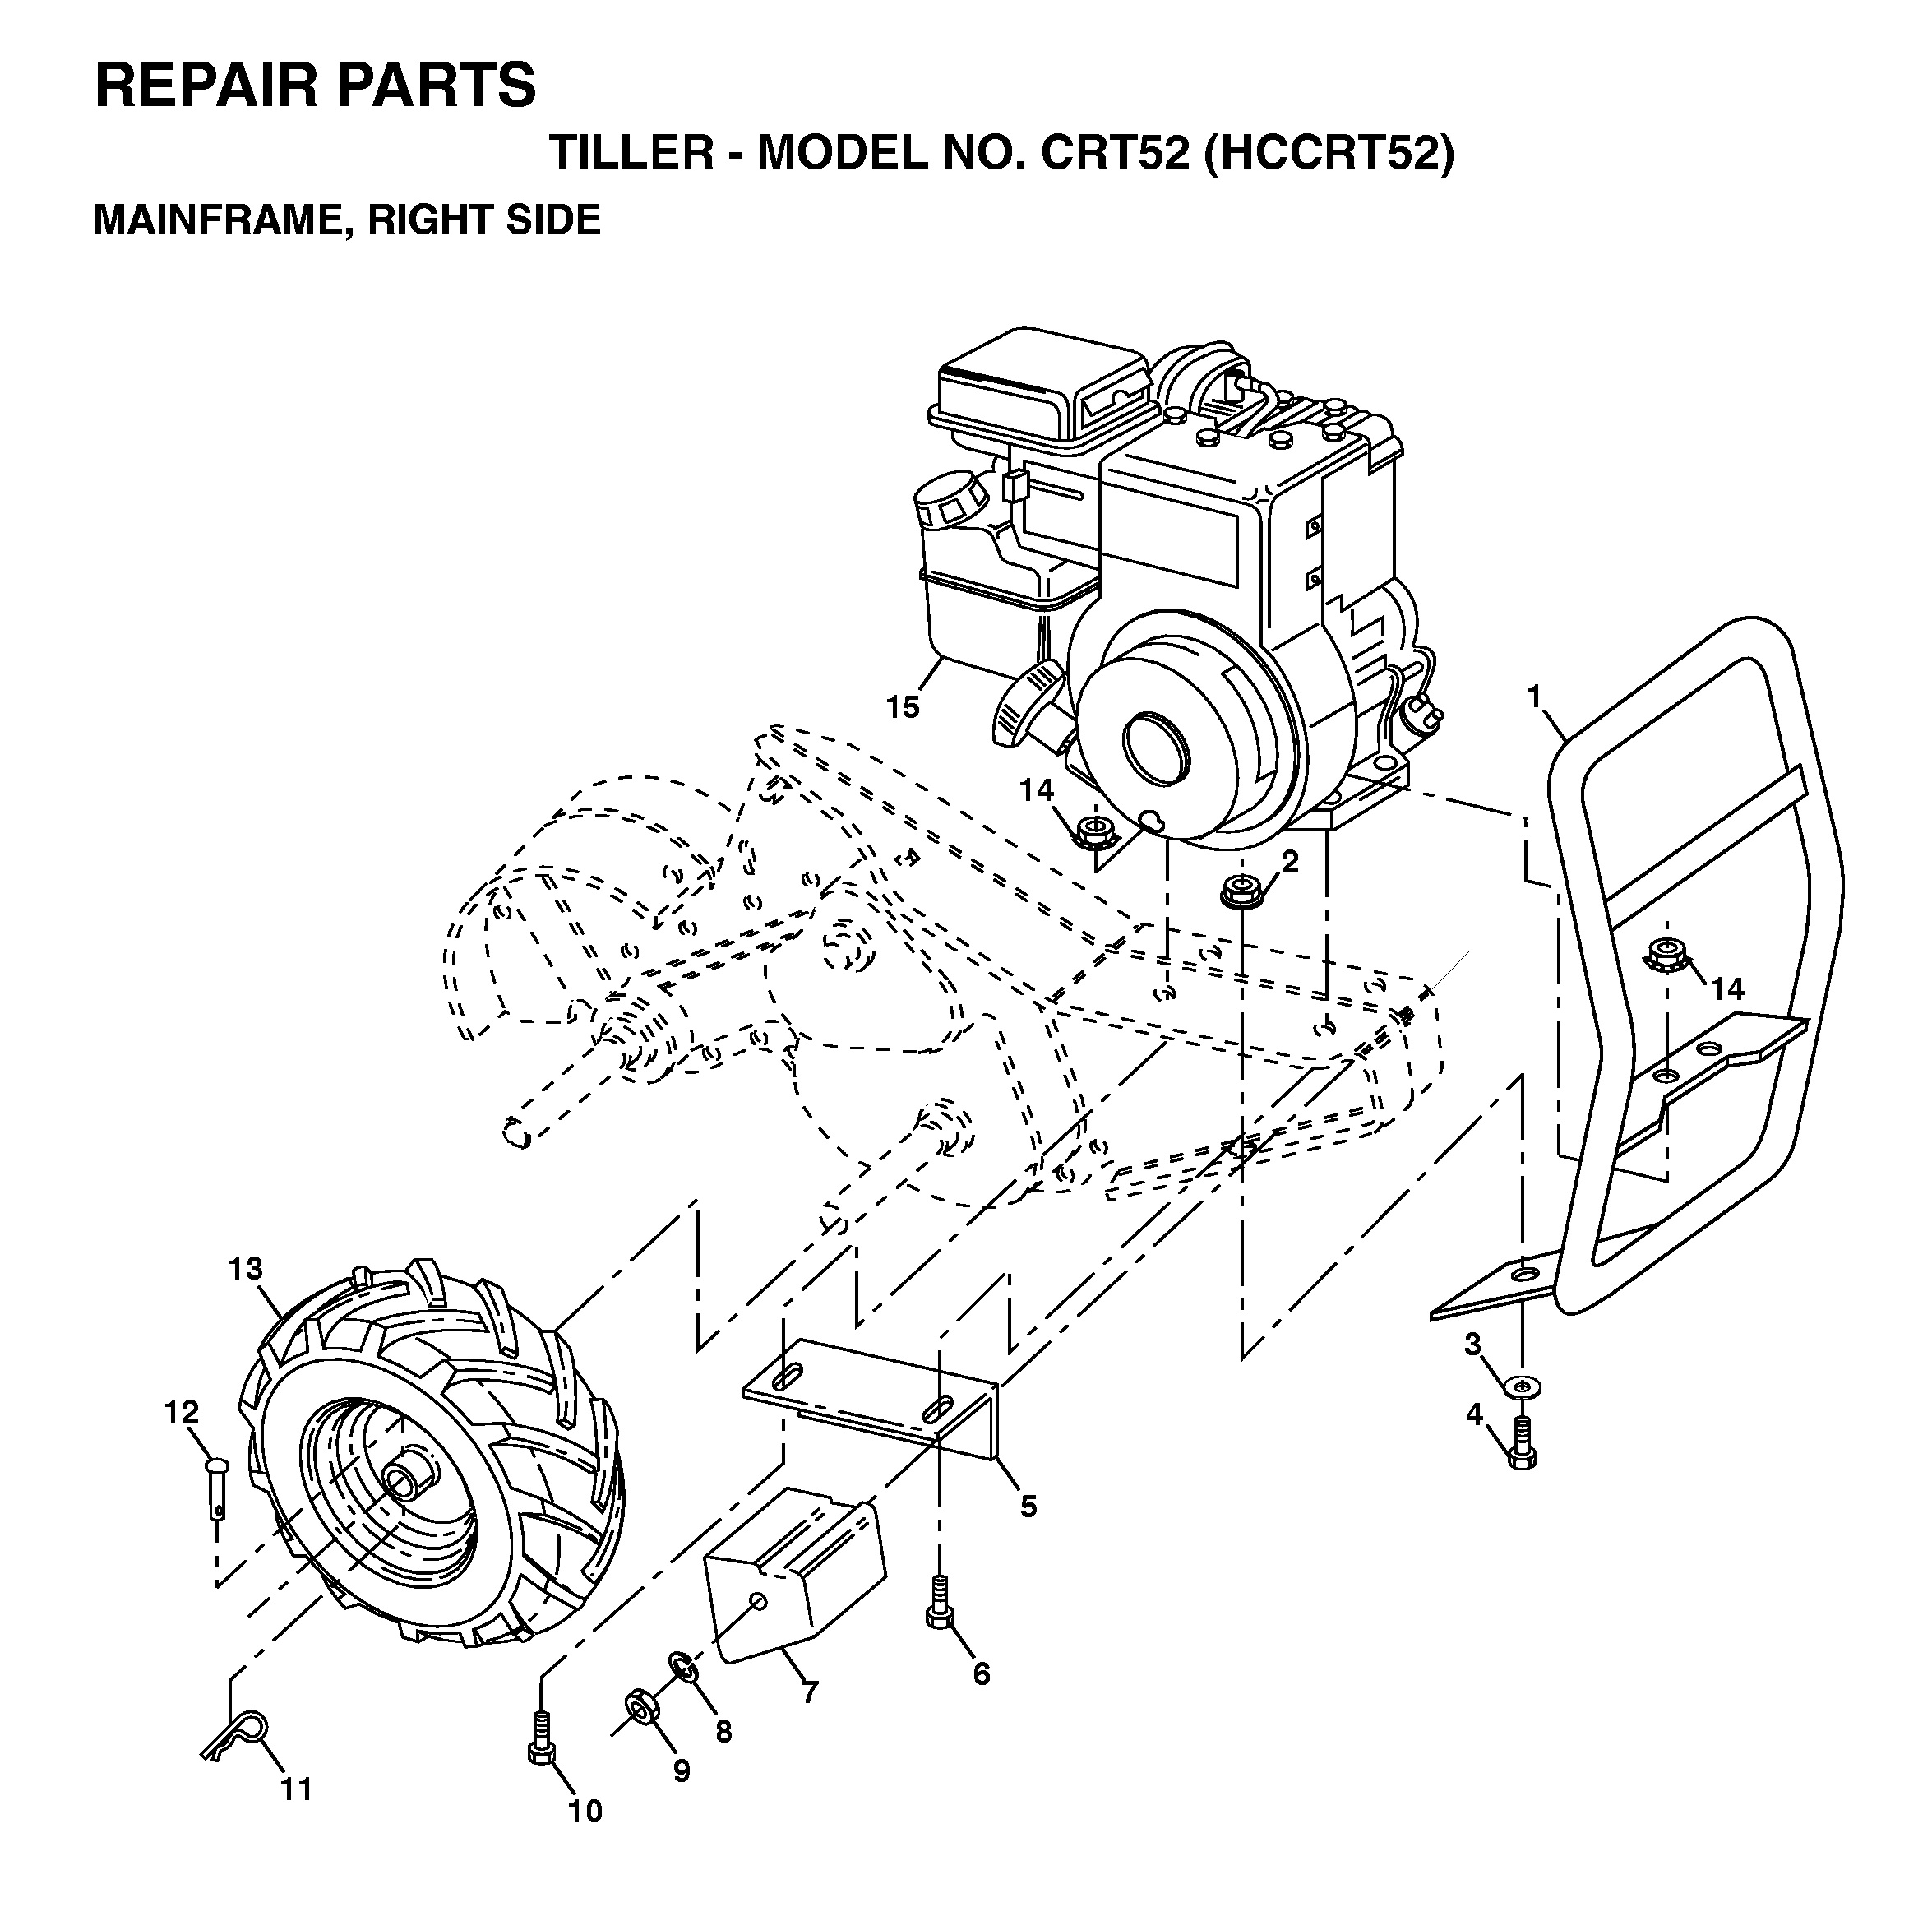 Main frame, right side 532155951, 596040501, 734116301, 596030501, 532102332, 874760532, 532102173, 596238701, 873220600, 874760524, 532004497, 532126875, 532005015, 532124366, 532065139, 596040501